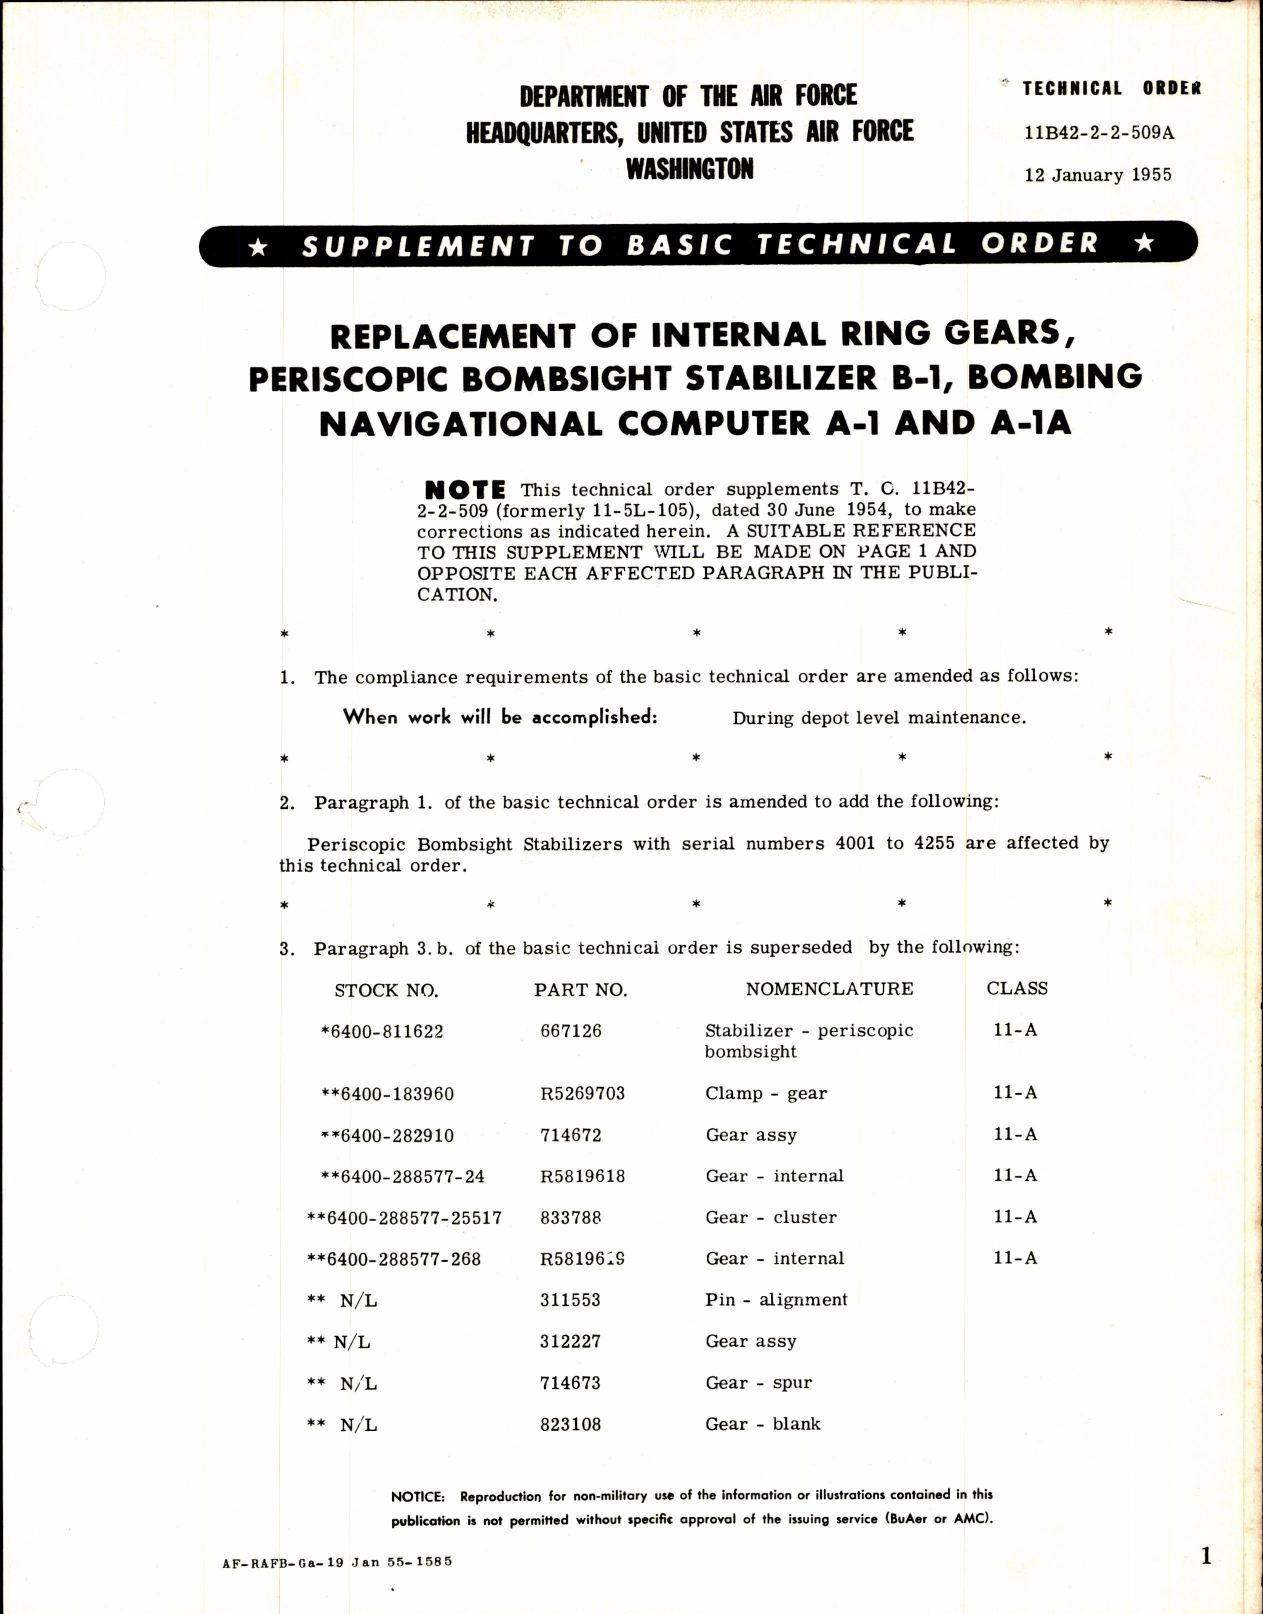 Sample page 1 from AirCorps Library document: Internal Ring Gears for Periscopic Bombsight Stabilizer B-1